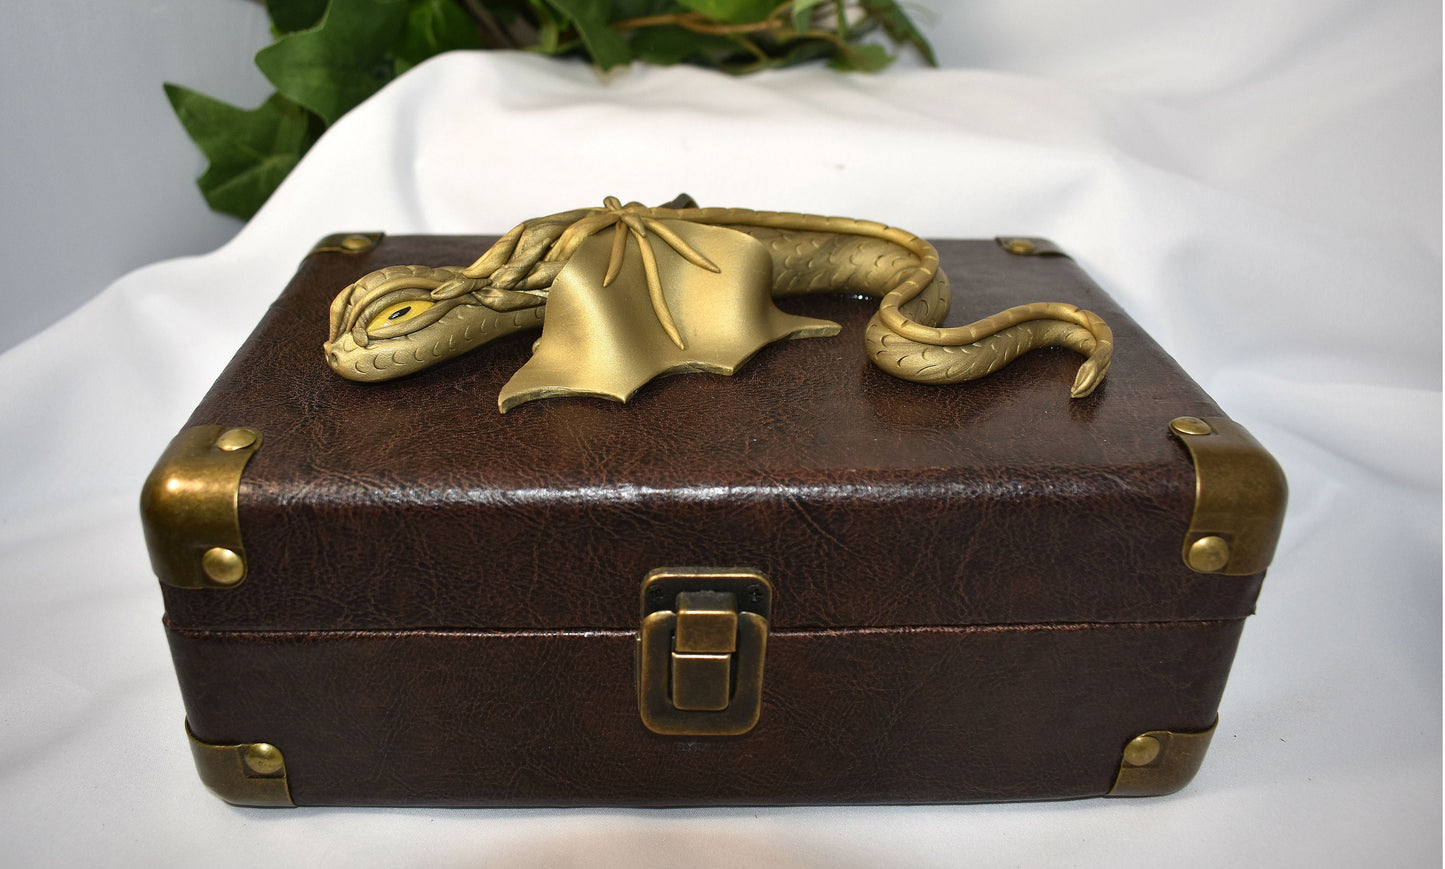 Polymer Clay Gold Dragon on Brown Chest - 1-113